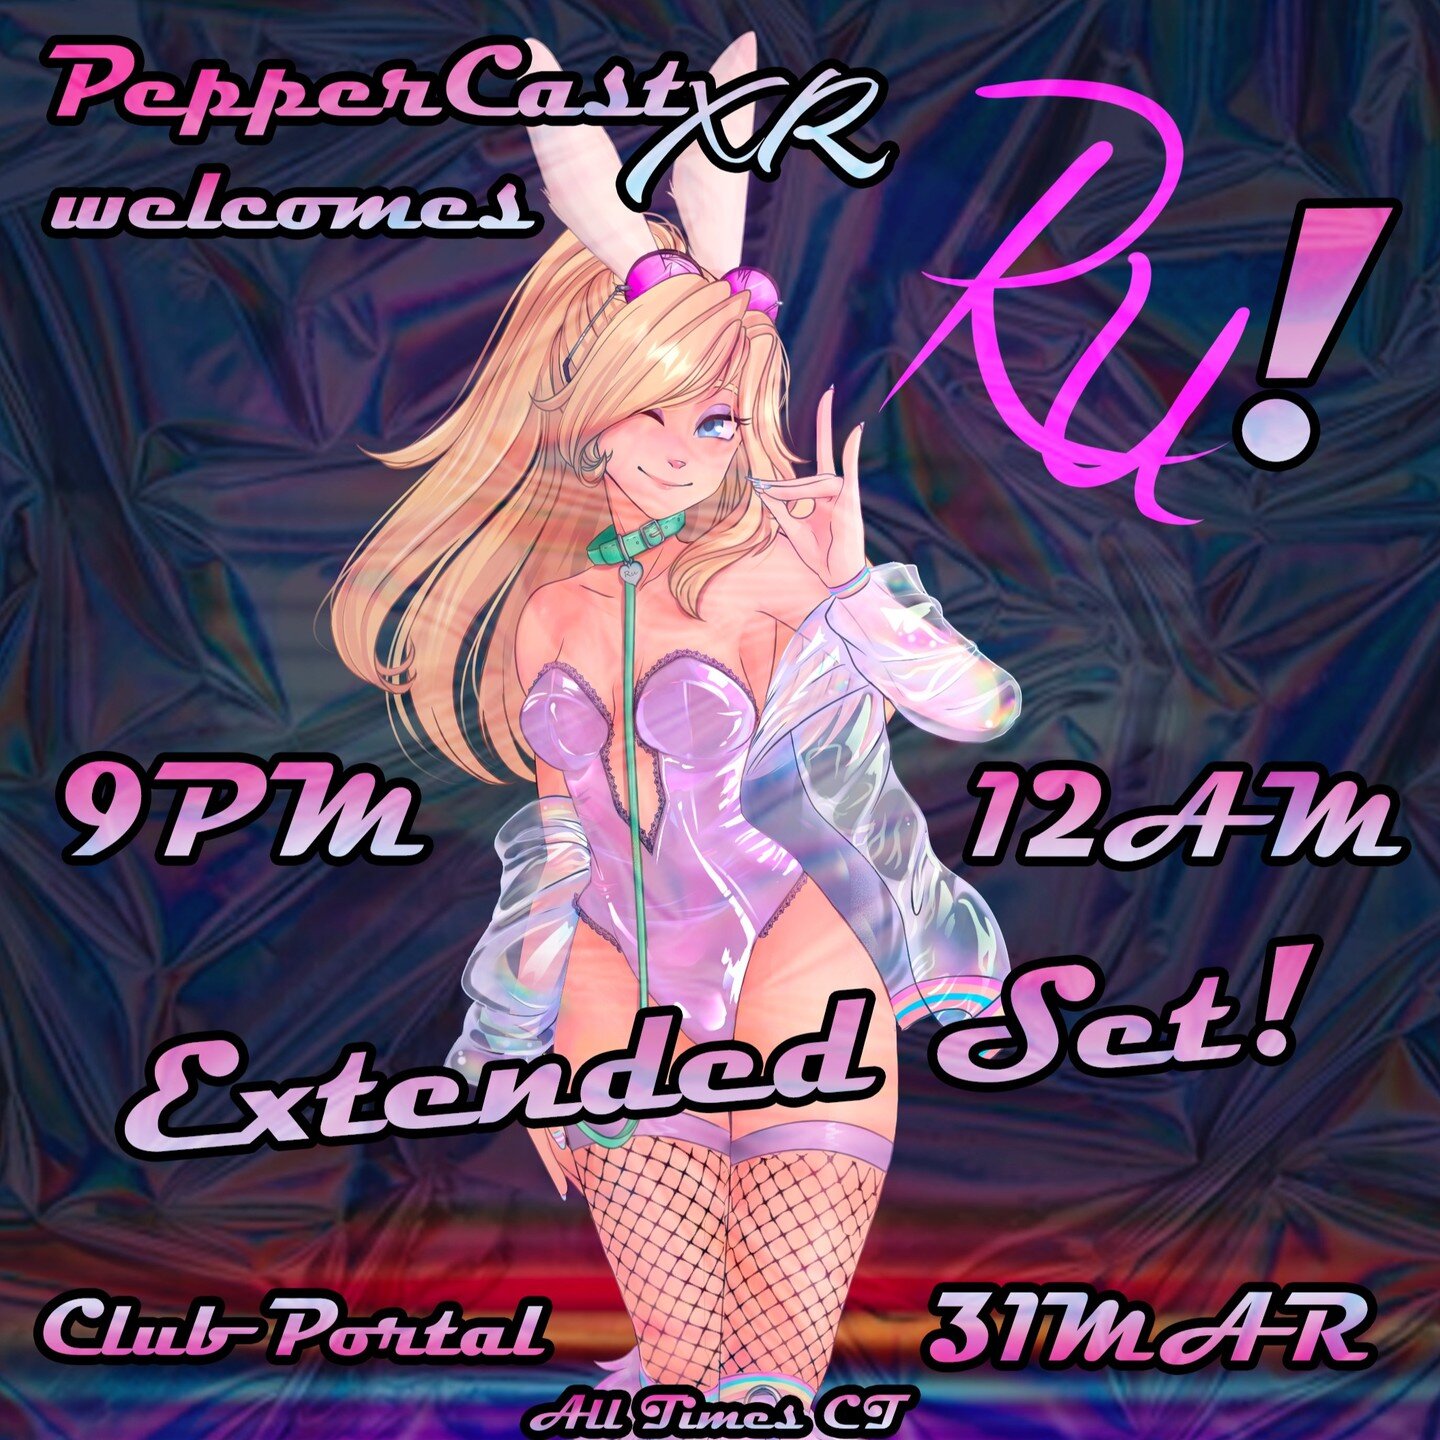 Partying tonight with @transversewithru to welcome our new DJ coordinator! Club Portal will open its doors the last Friday of every month to kick the weekend off right.

Join our discord for world invite when we go live!
https://discord.com/invite/fW